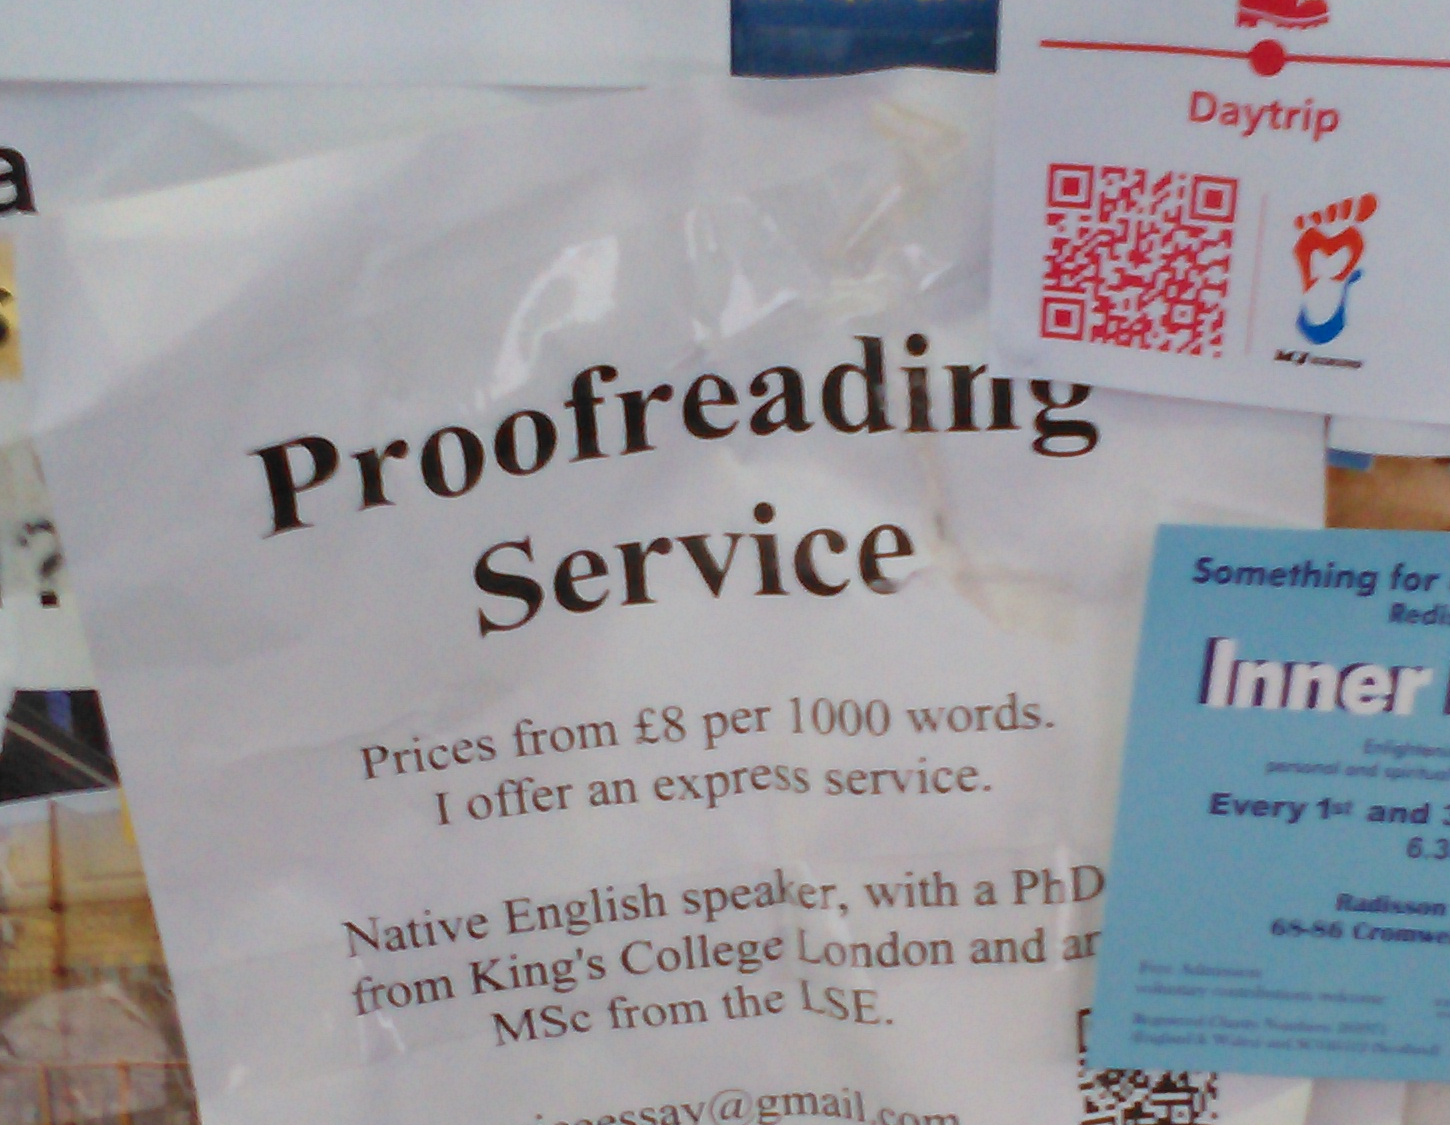 Proof reading service on notice board at IC